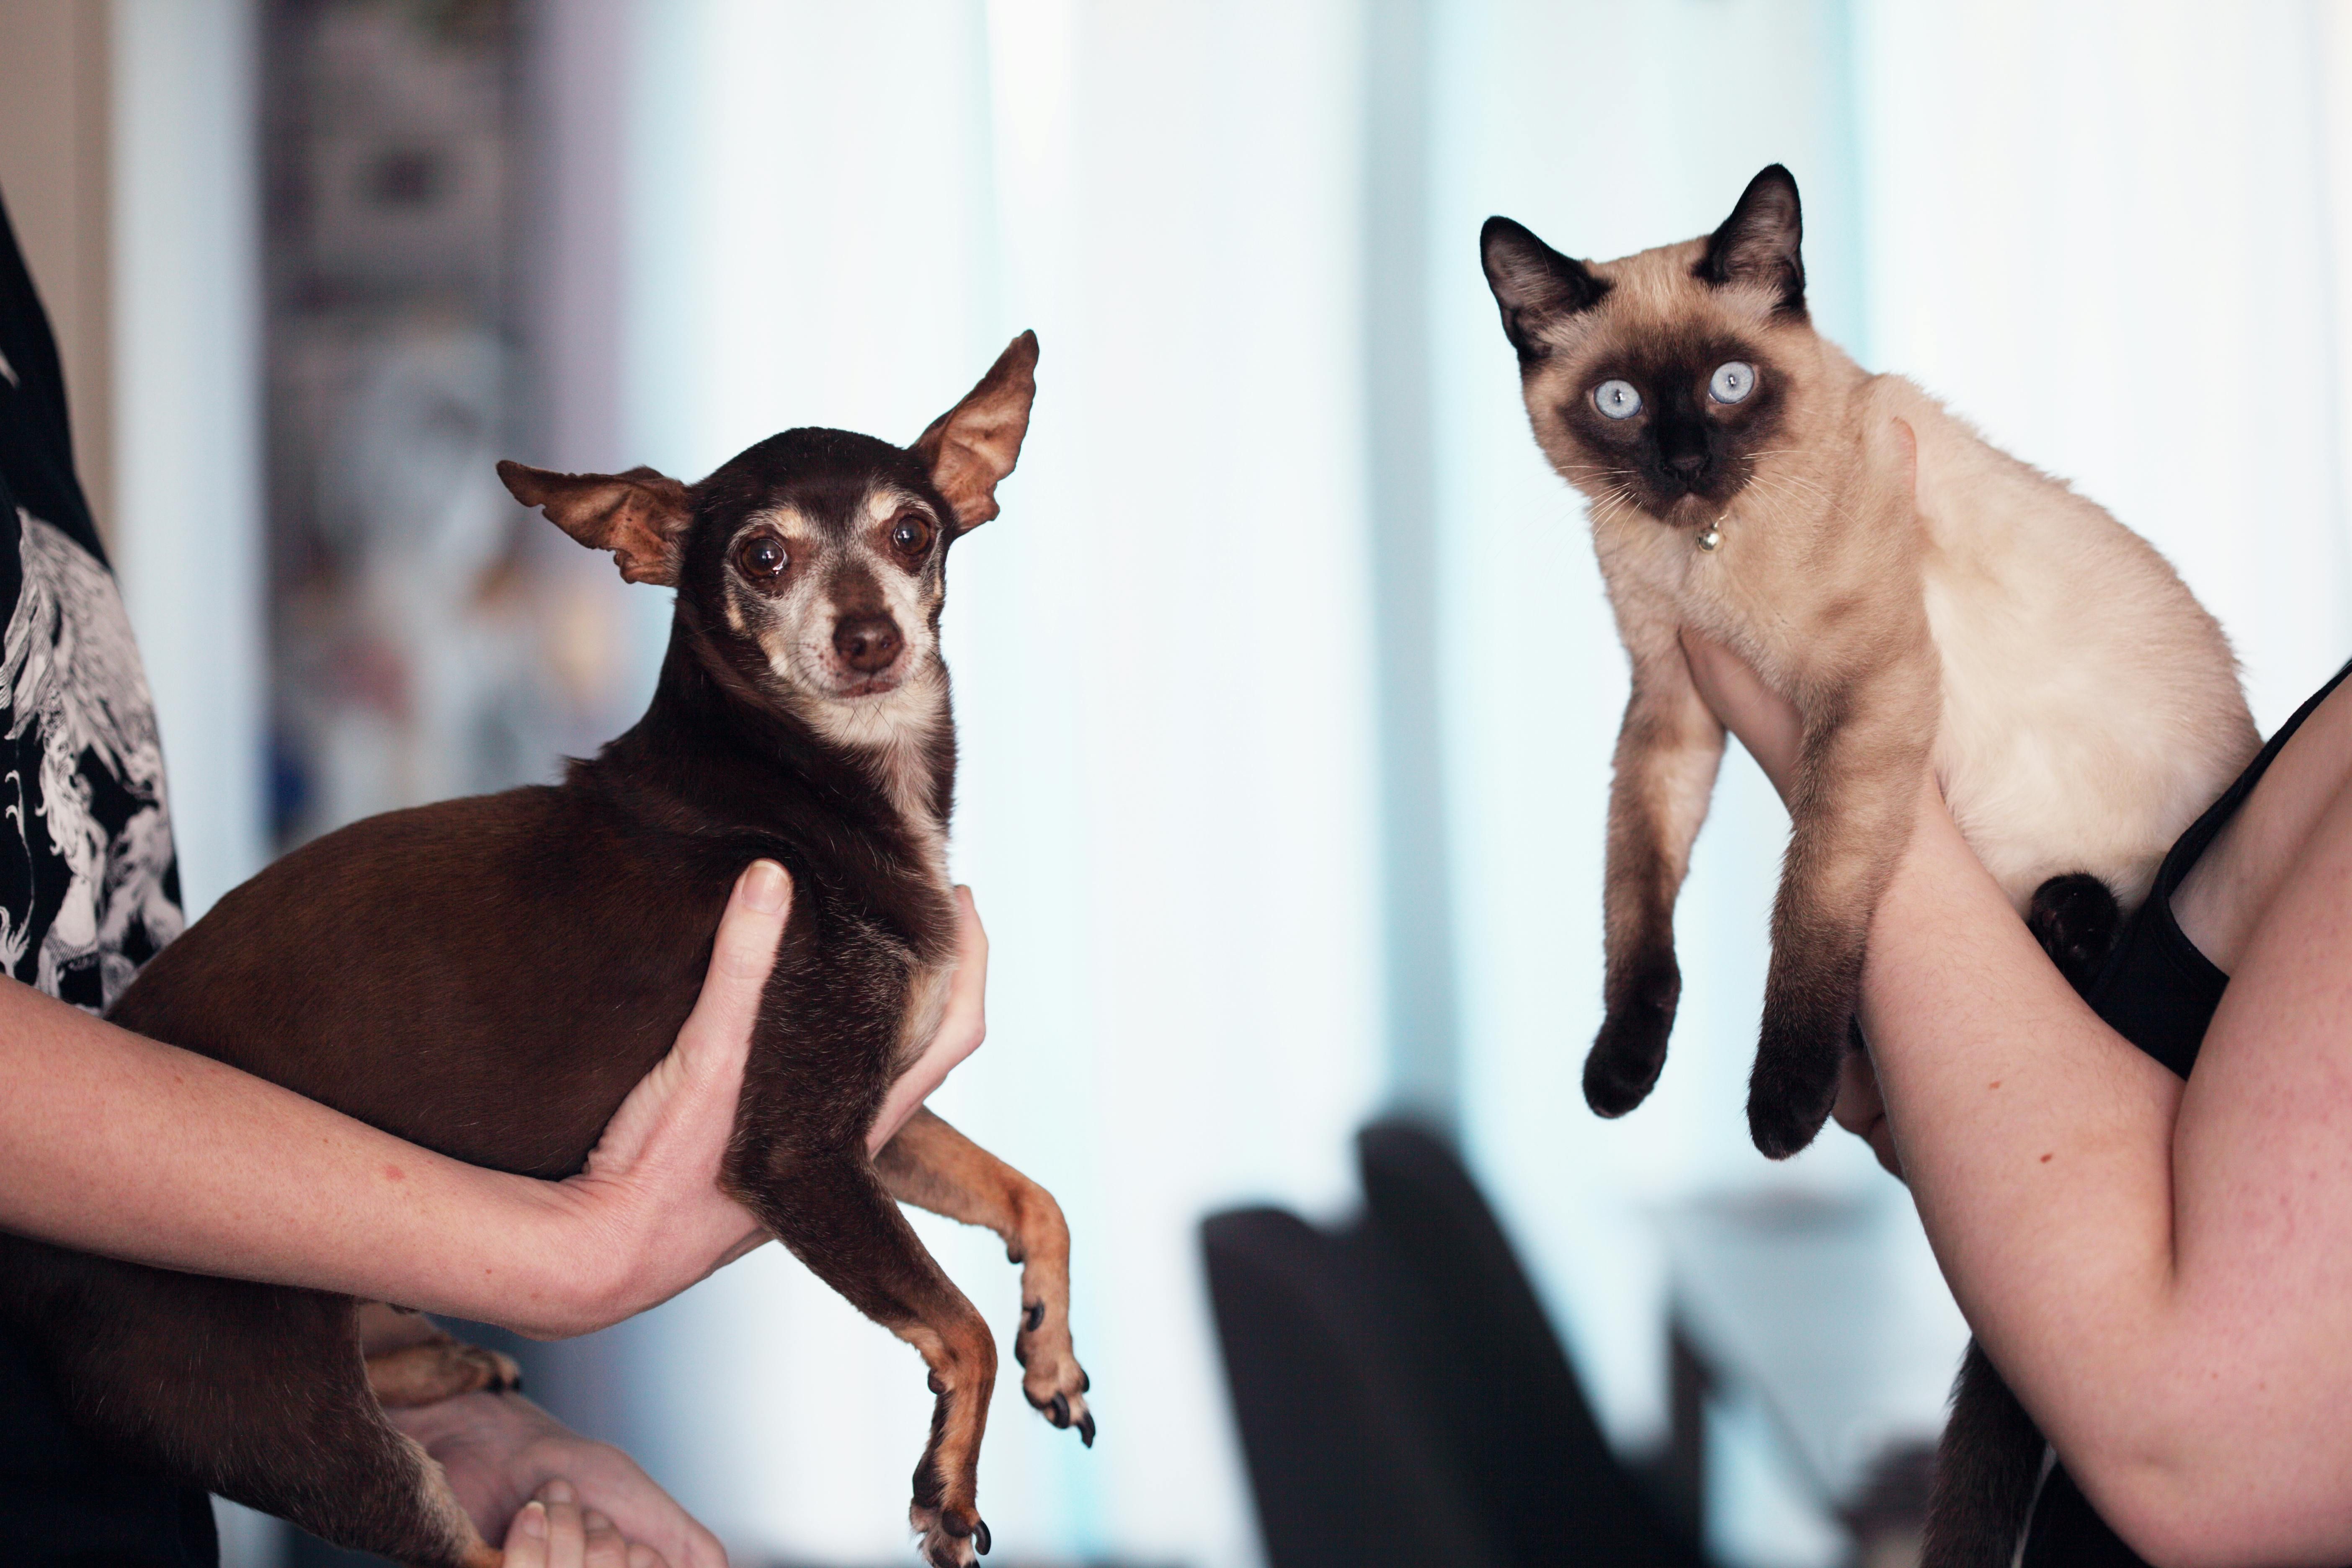 Two persons holding a Siamese cat and a Chihuahua